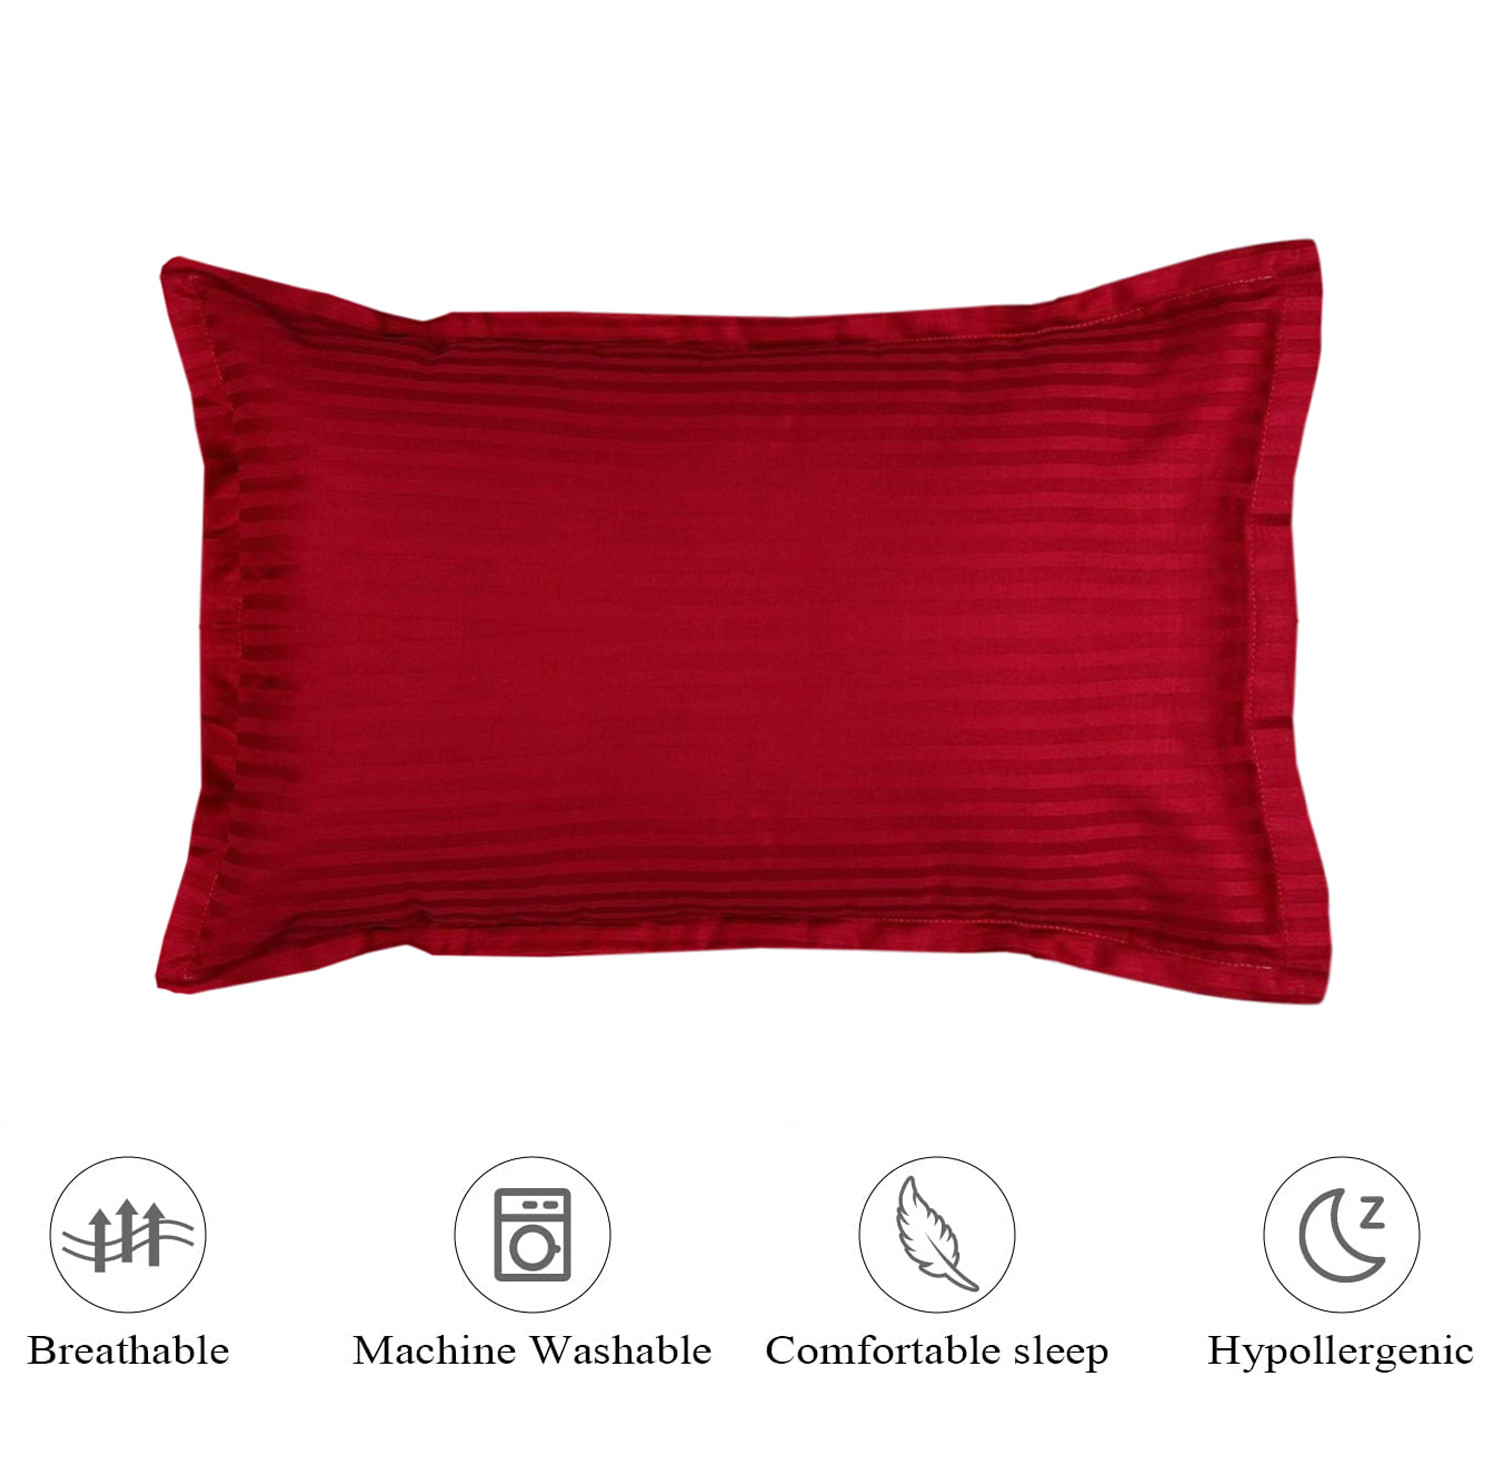 Kuber Industries Strips Print Breathable & Soft Cotton Pillow Cover For Sofa Couch Bed(Red) 54KM4125